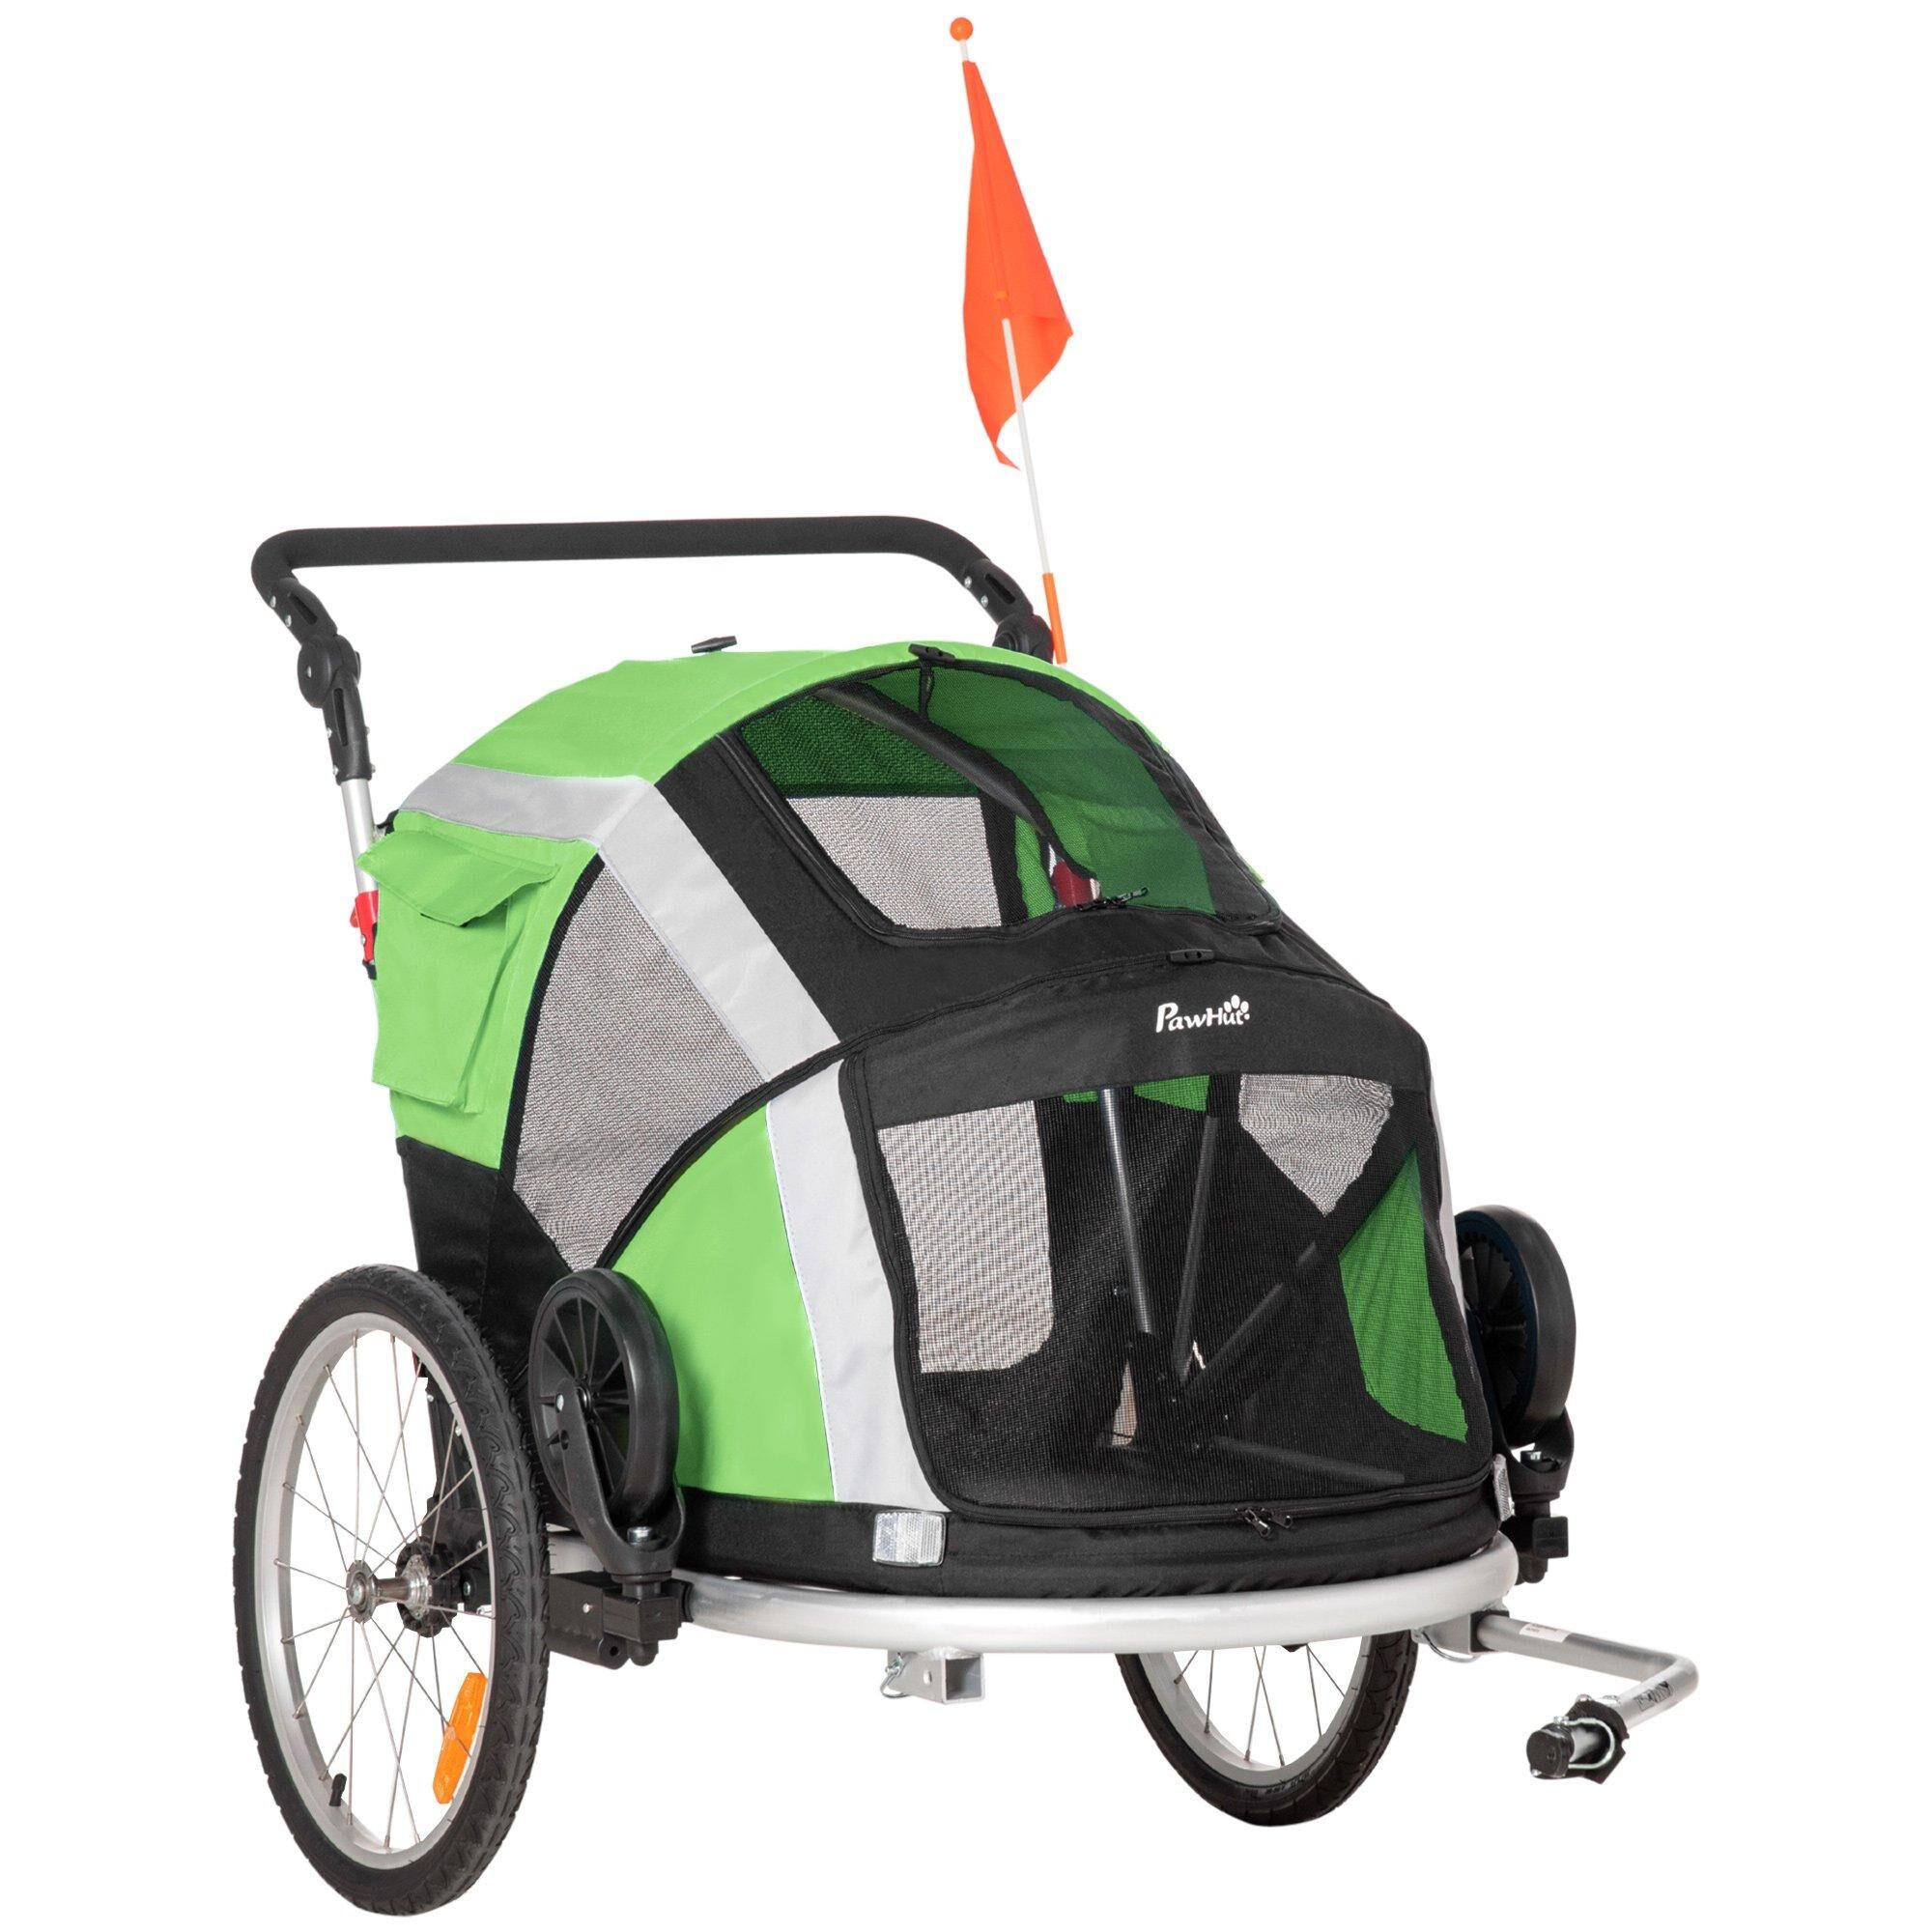 PawHut Dog Bike Trailer 2-in-1 Pet Stroller for Large Dogs Cart Foldable Bicycle Carrier Aluminium Frame with Safety Leash Hitch Coupler Reflector Flag